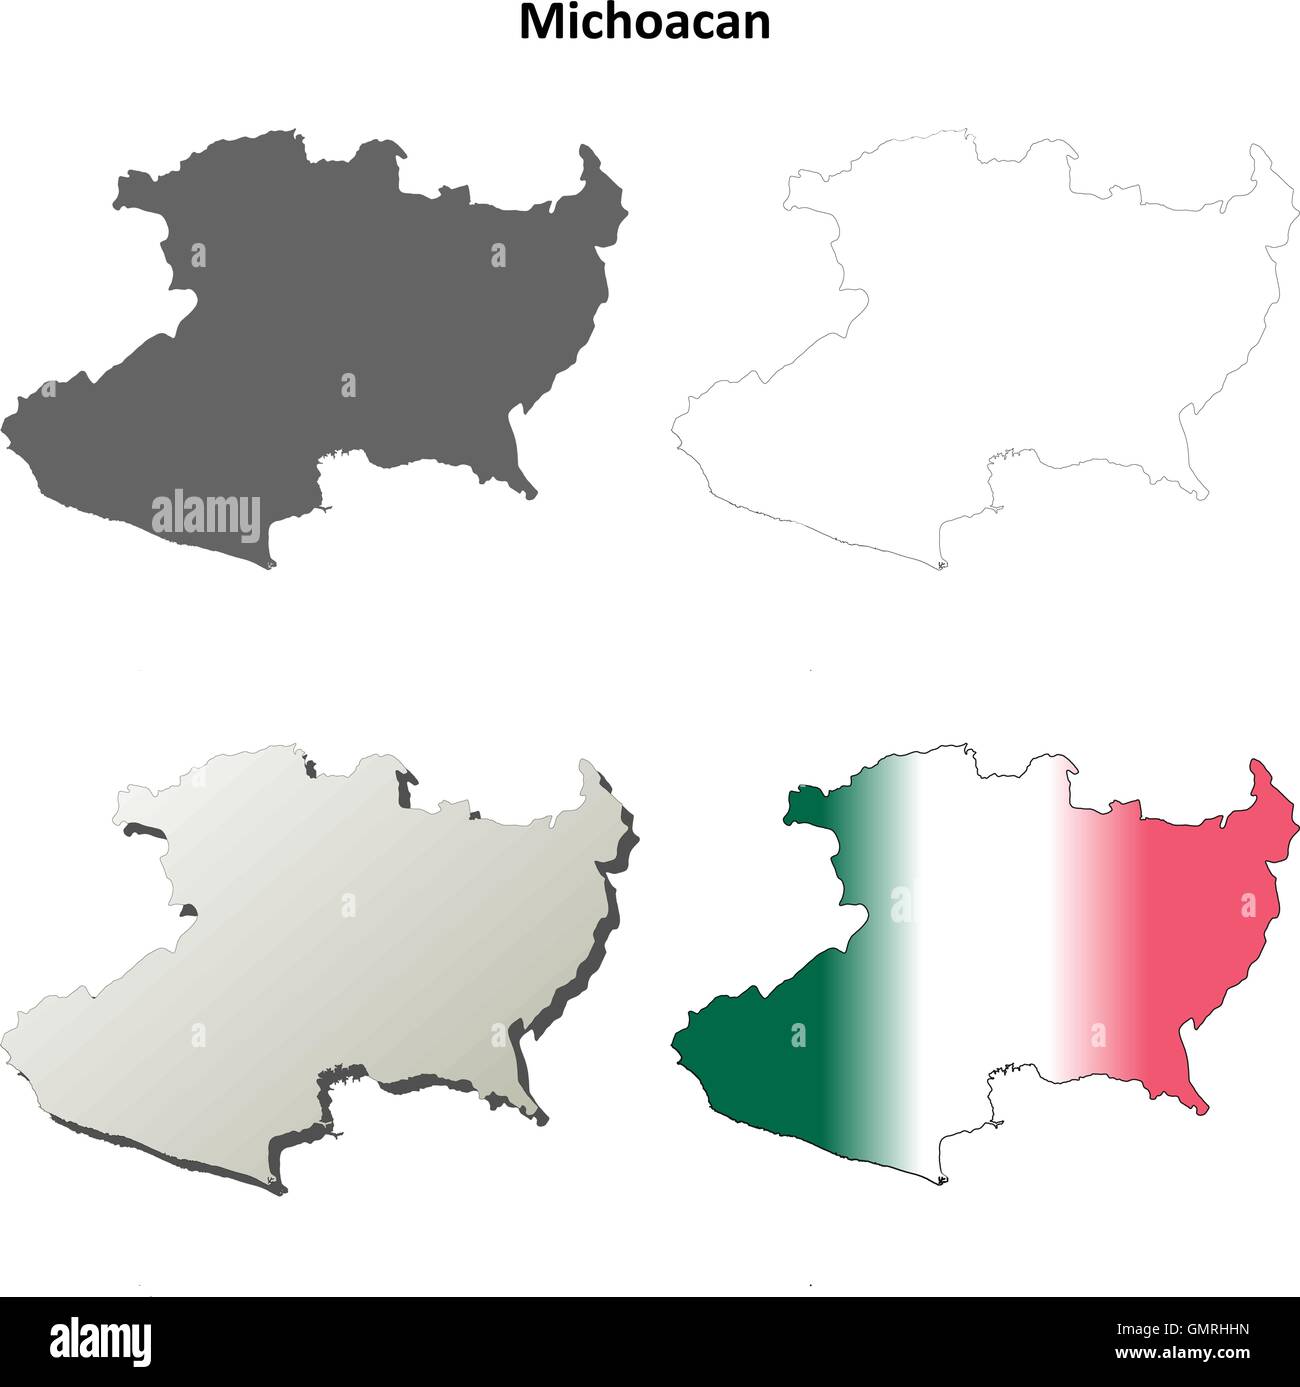 Michoacan blank outline map set Stock Vector